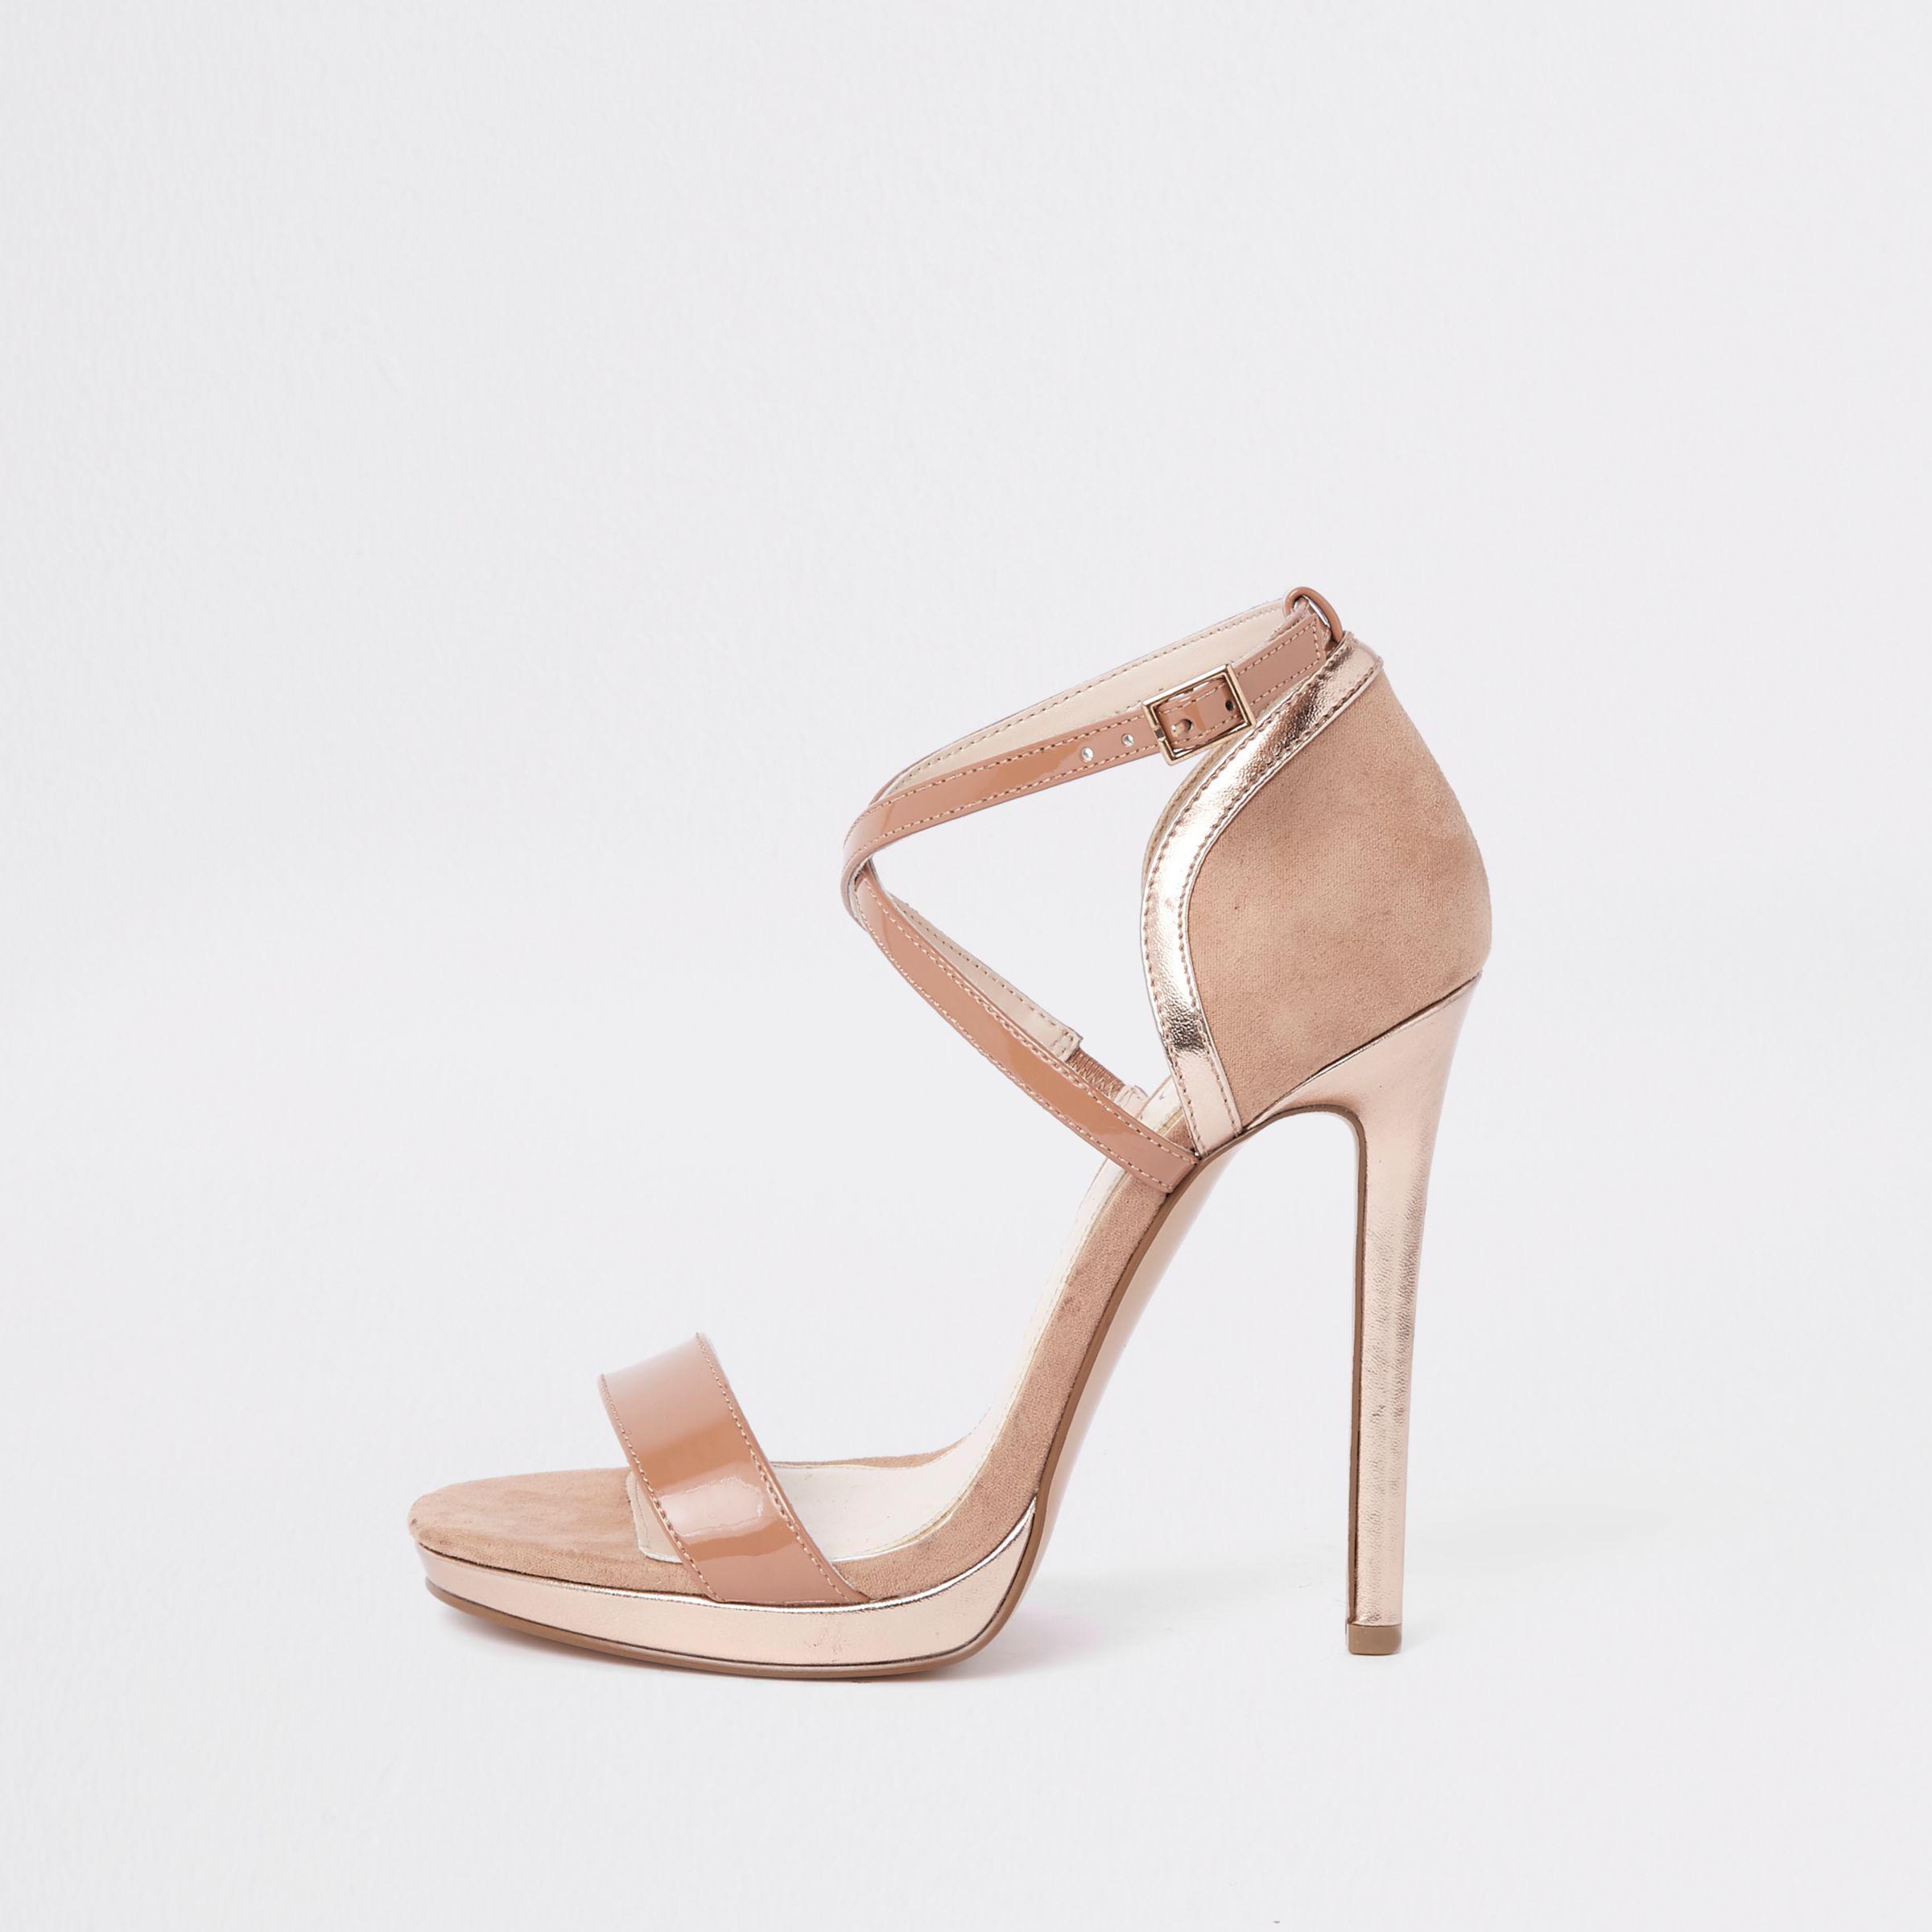 River Island Nude Barely There Platform Sandals in Natural - Lyst